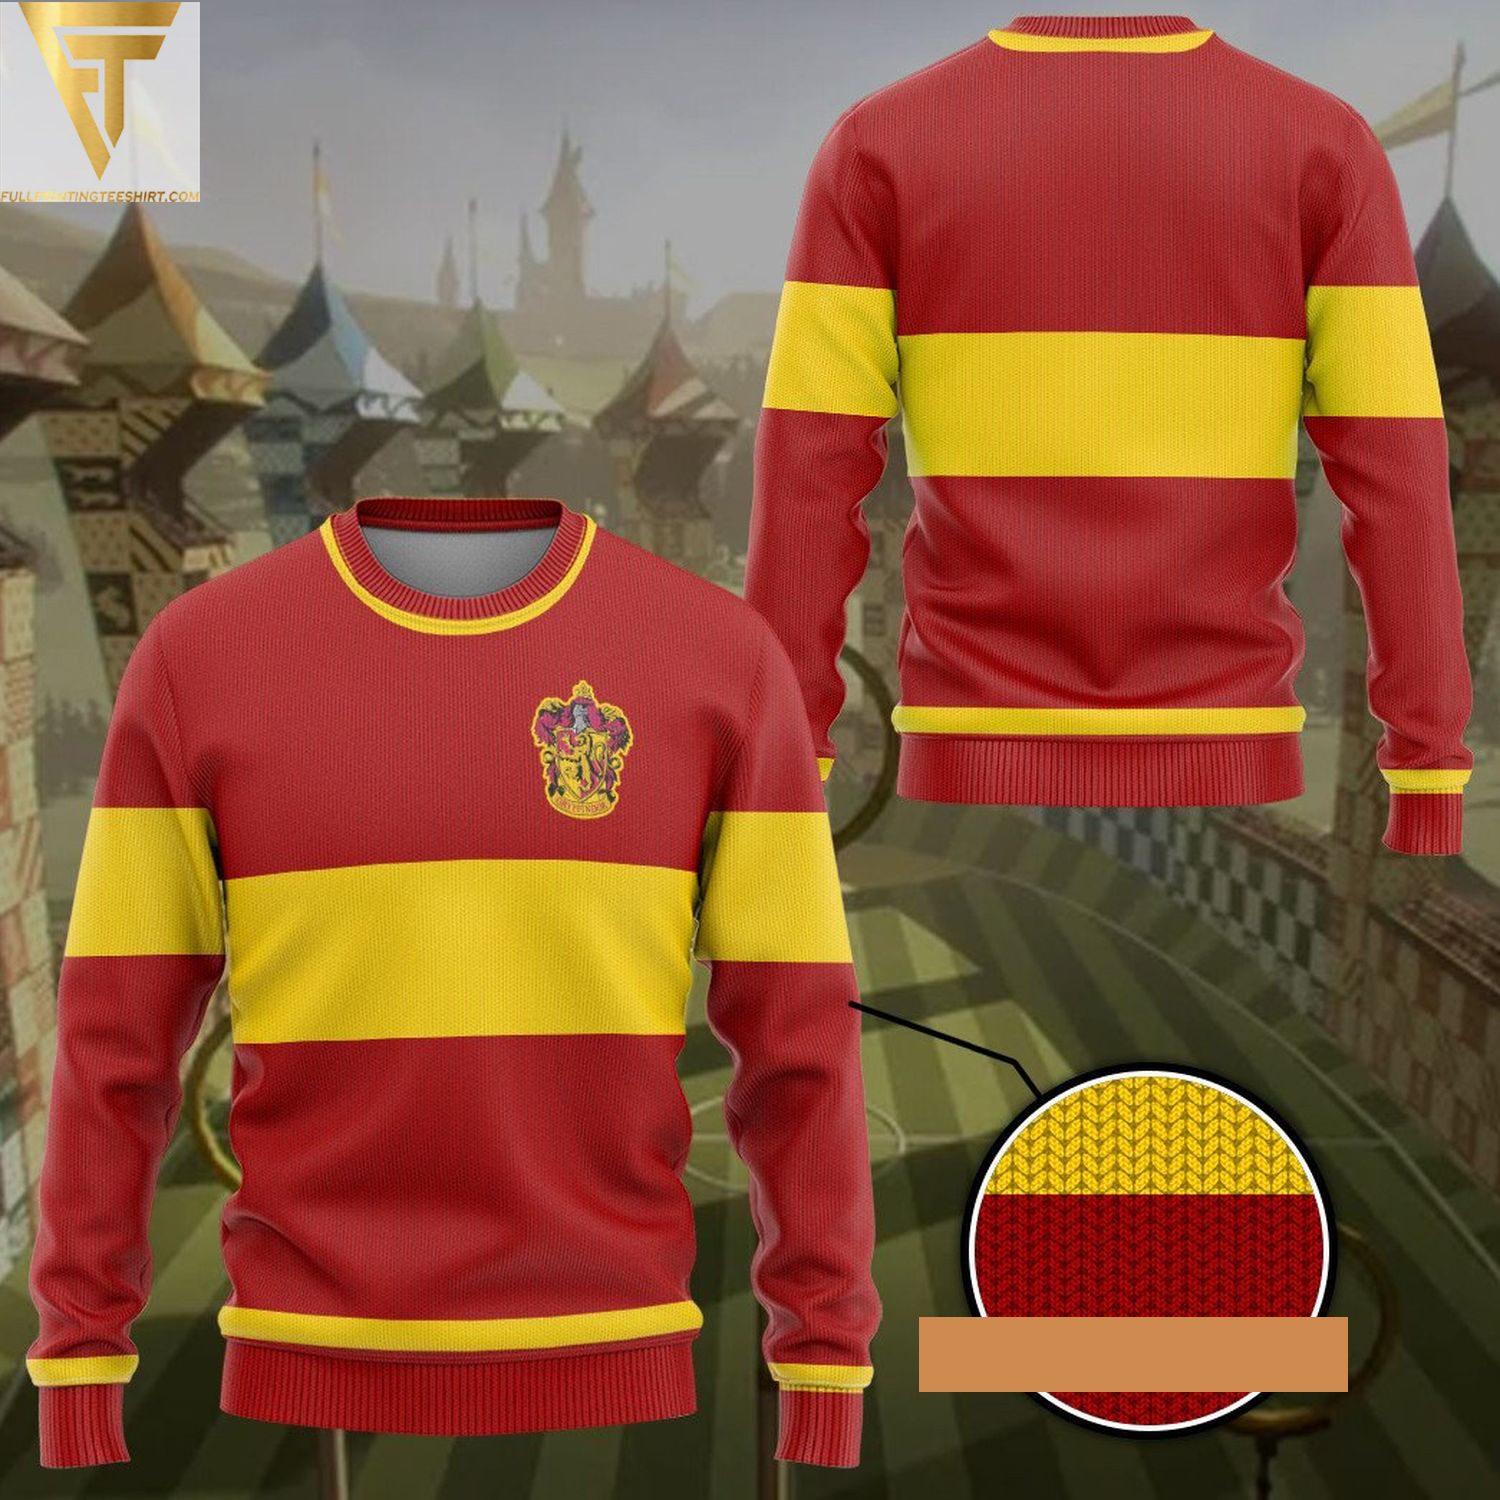 Harry potter gryffindor quidditch ugly christmas sweater - Copy (2)